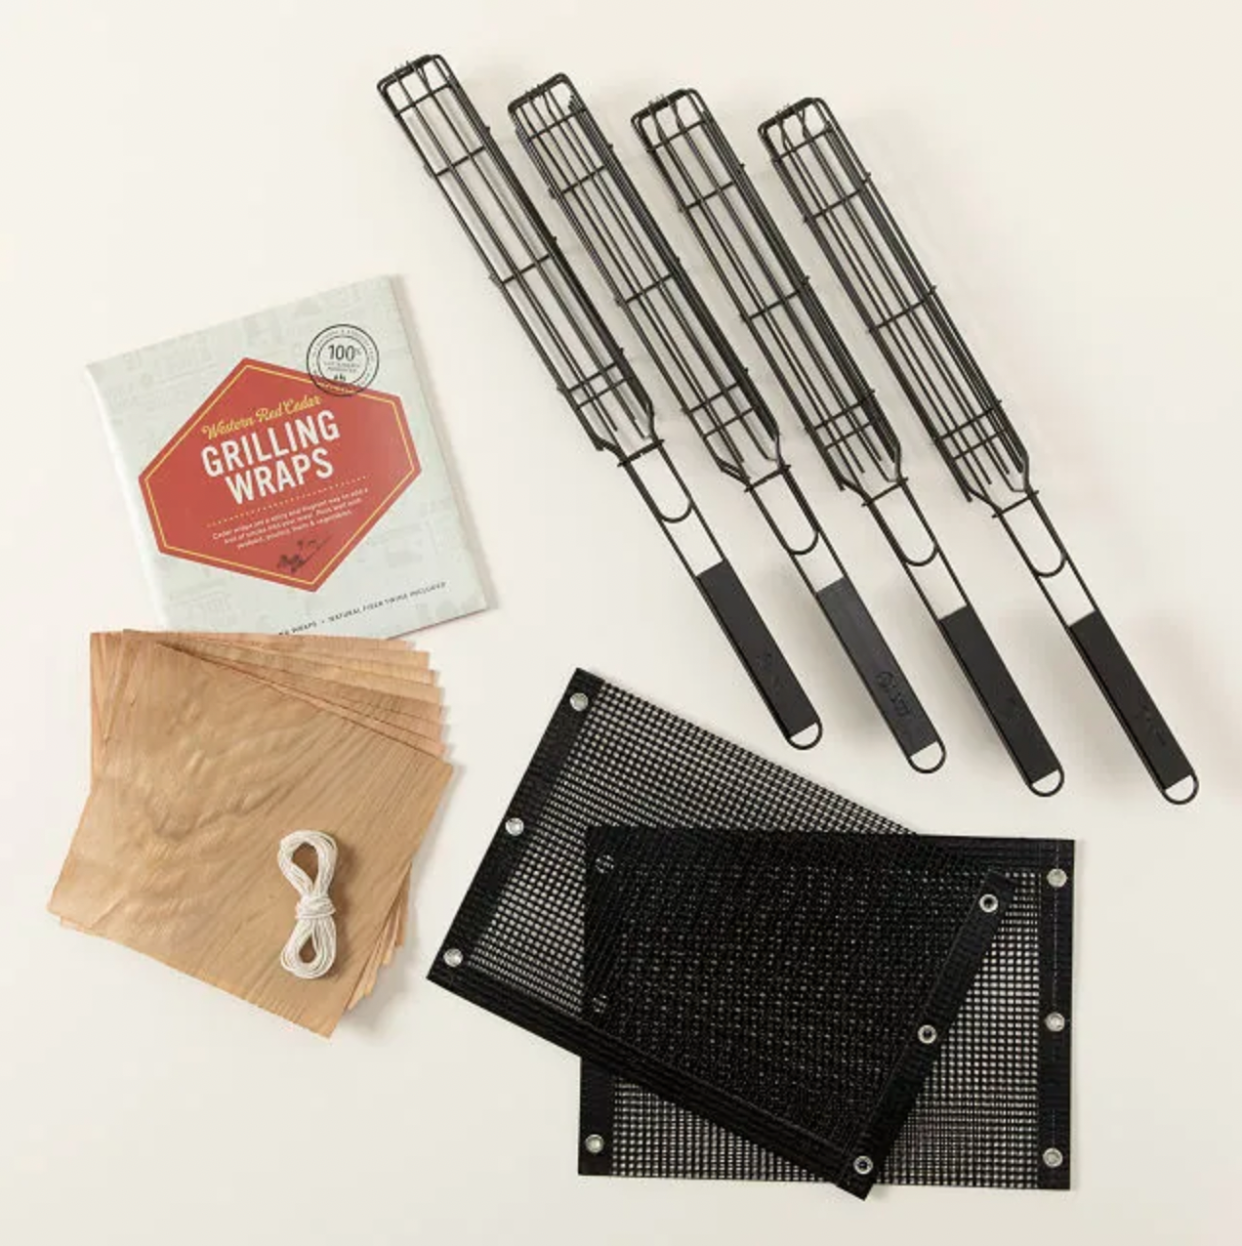 Grill Master Father's Day Gift Set from Uncommon Goods